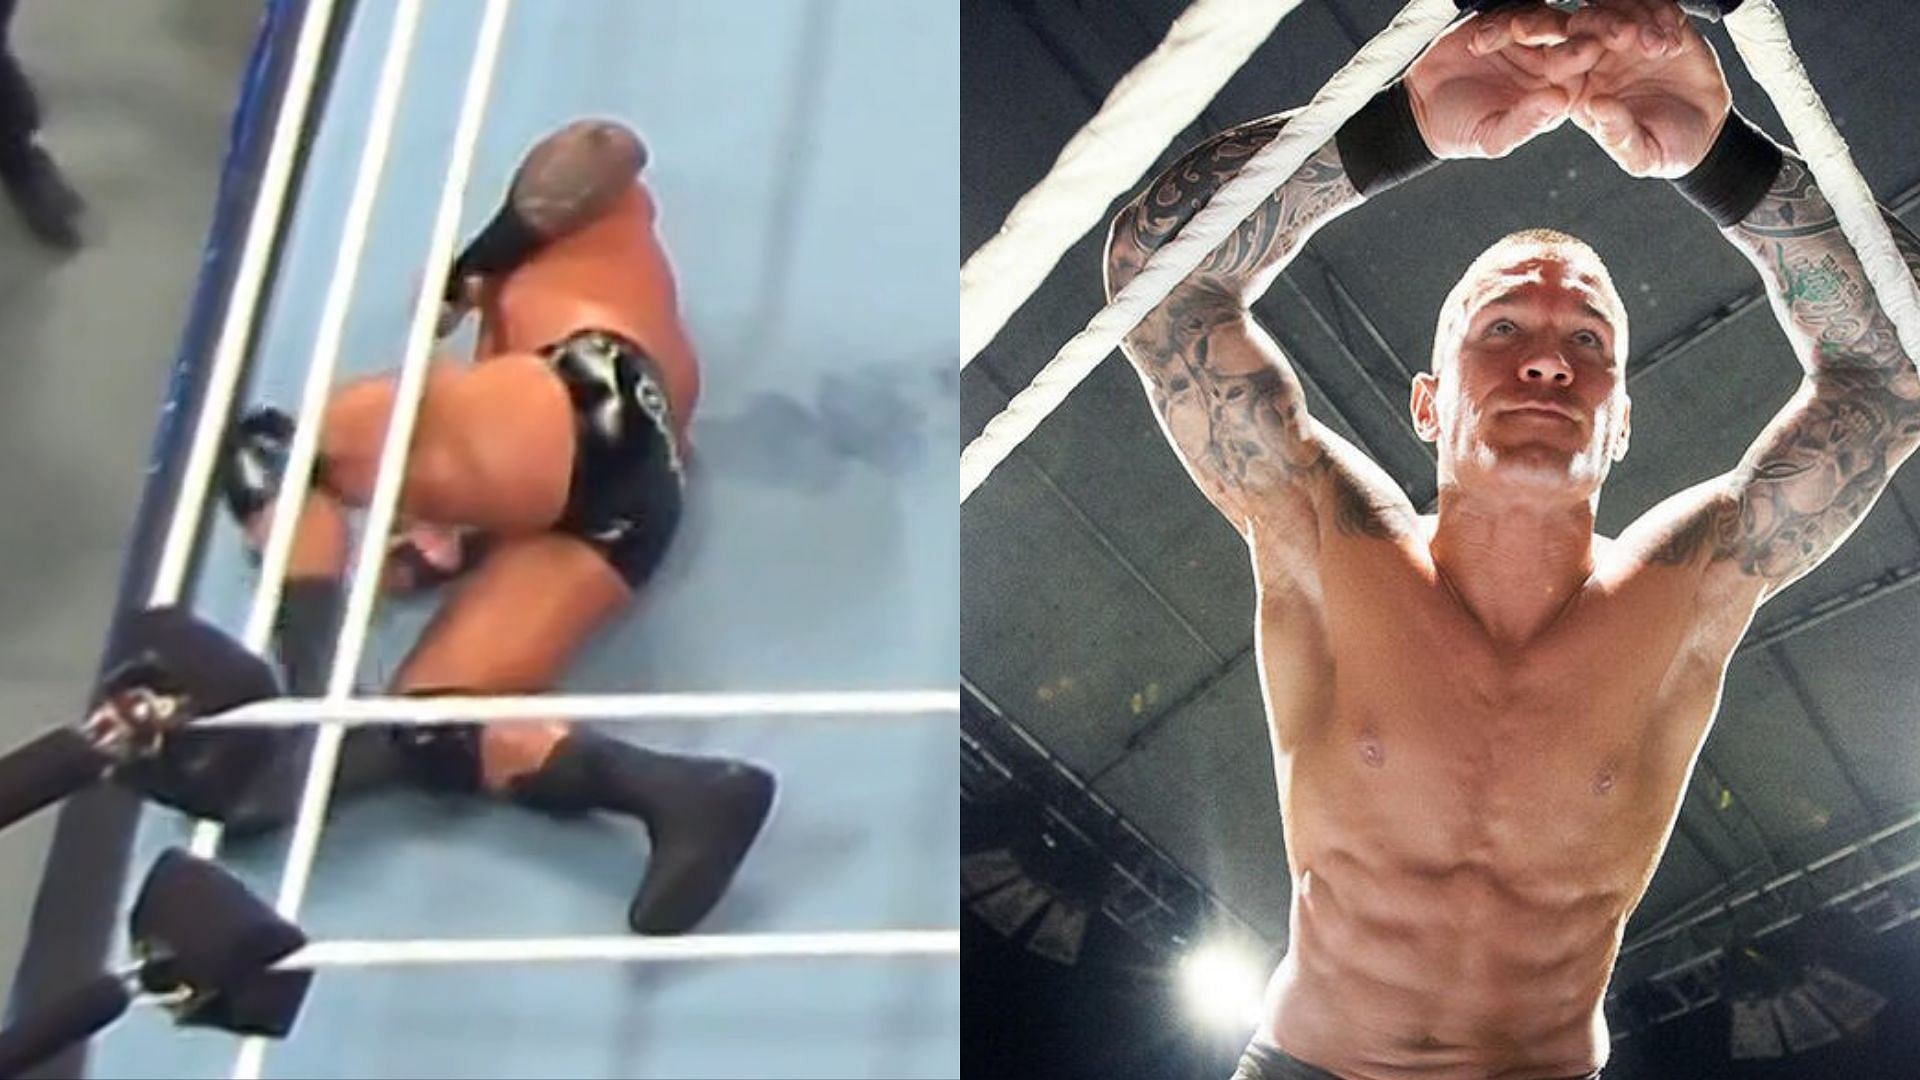 Randy Orton is facing quite a few issues right now